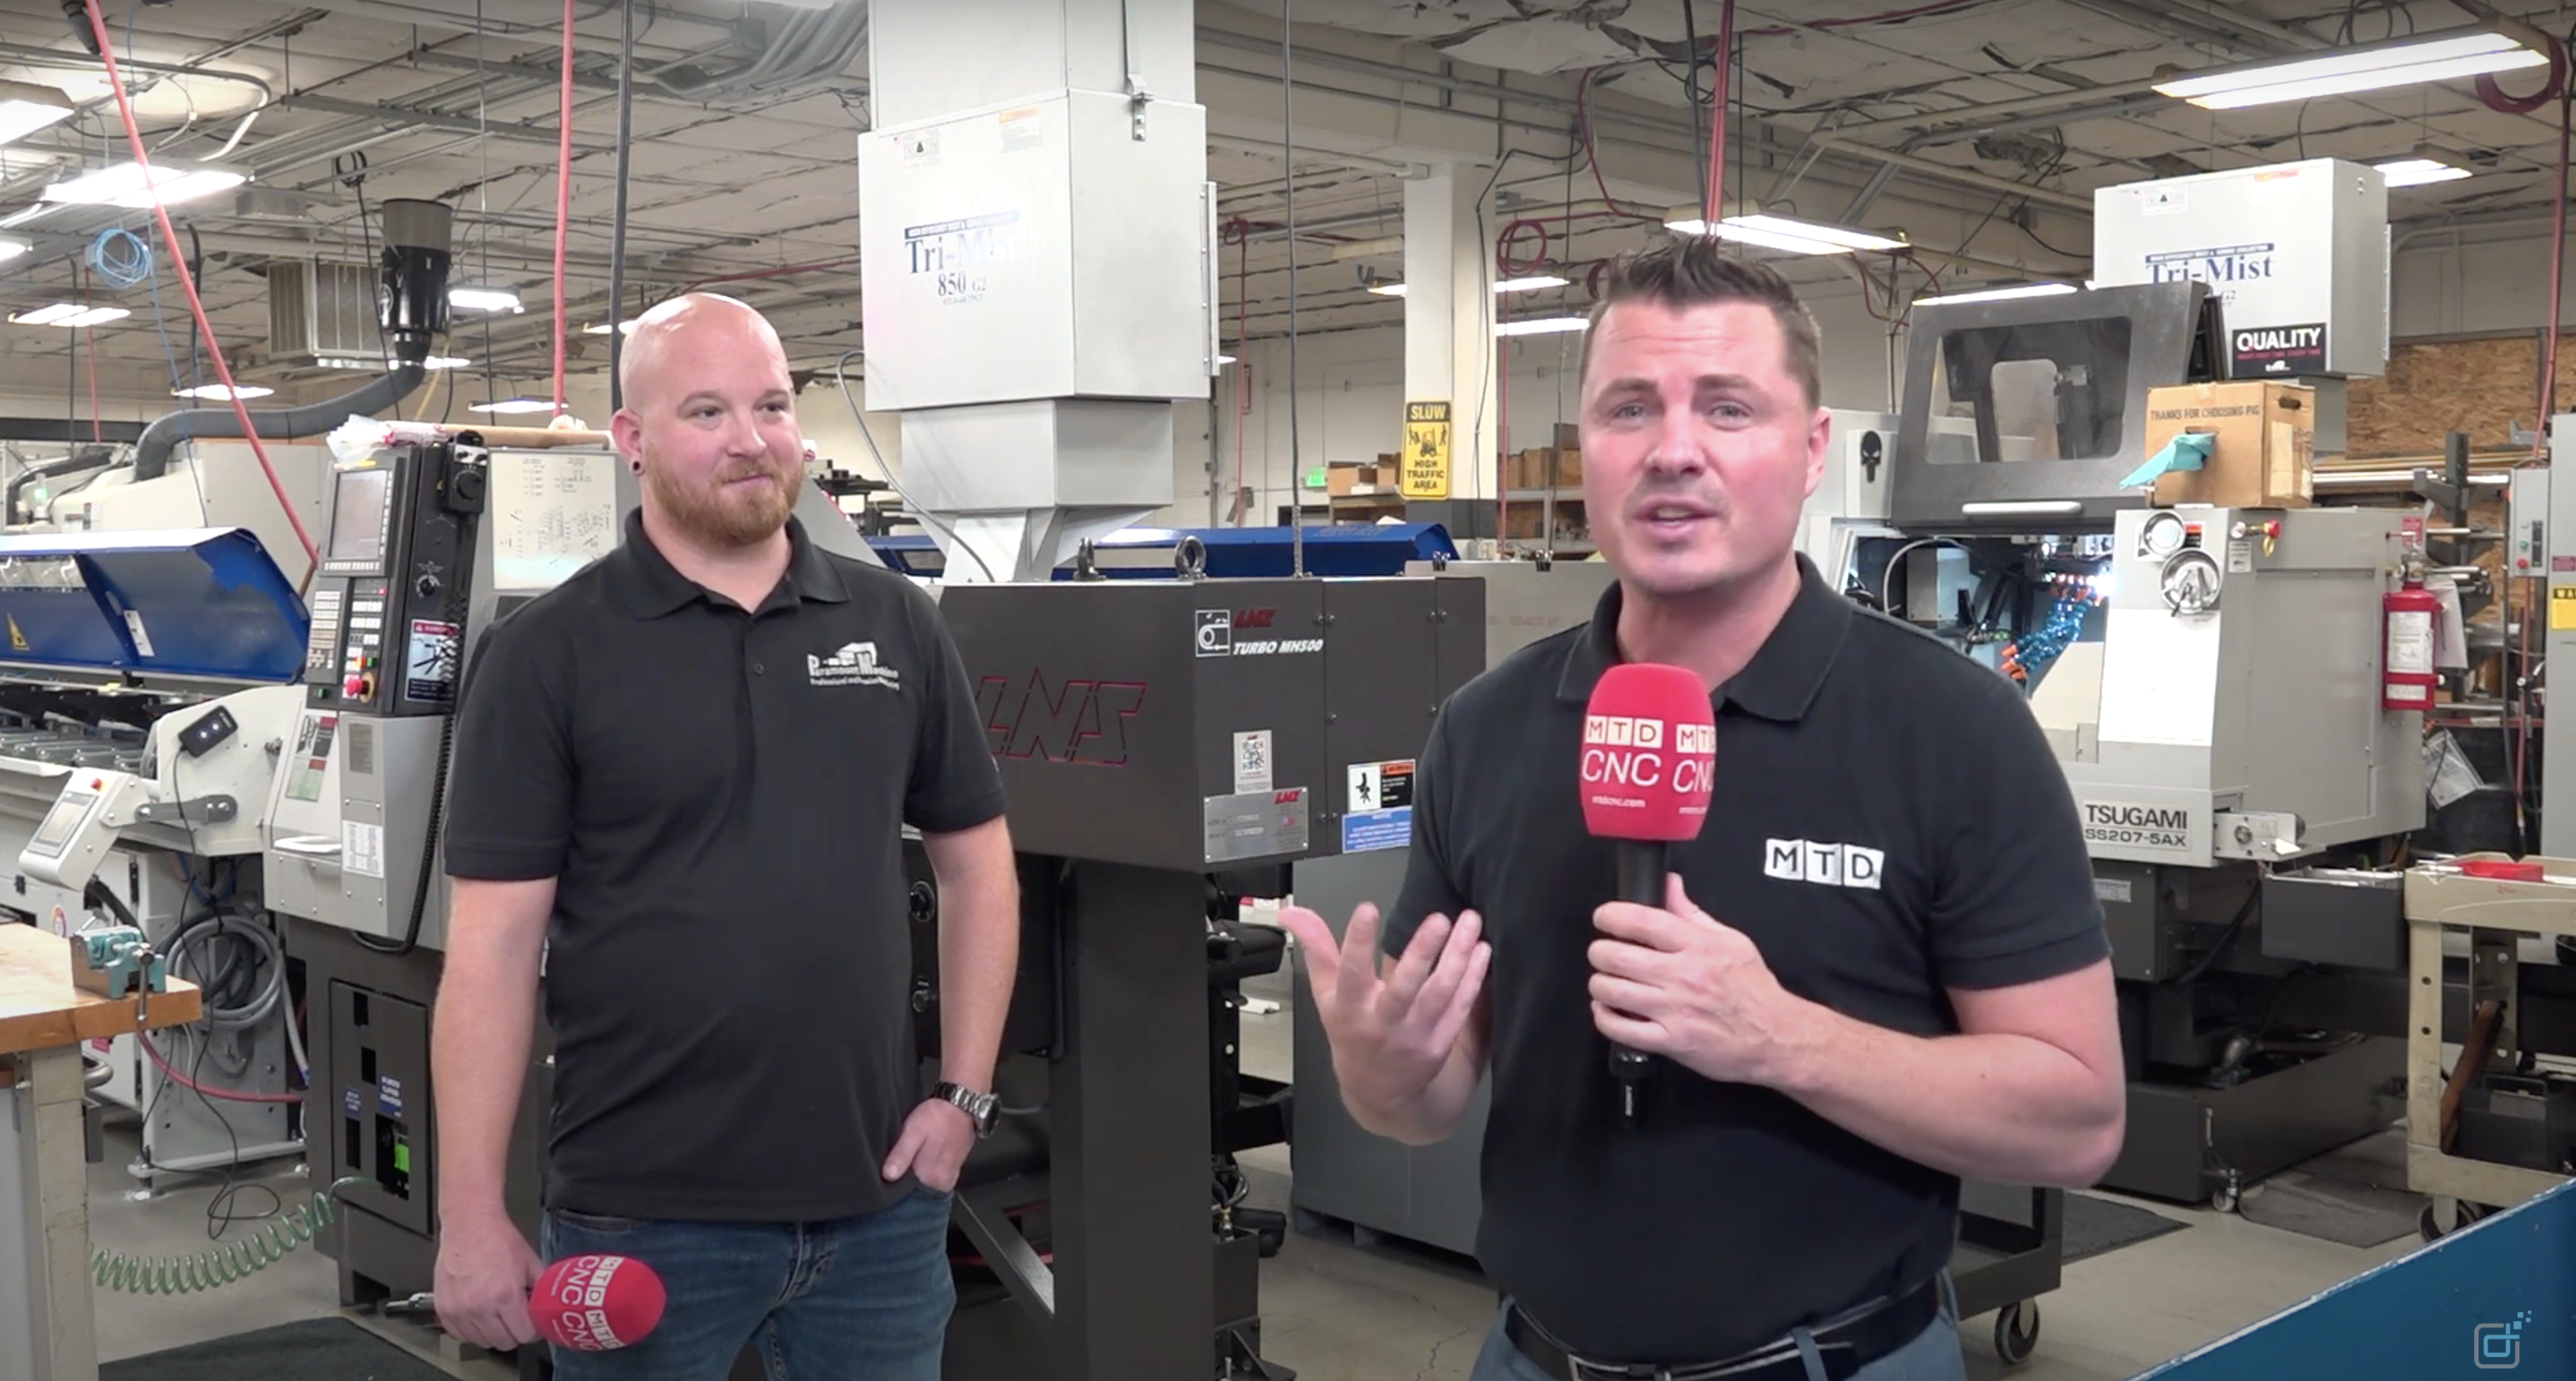 VIDEO: Paramount Machine Makes the Switch to Datanomix